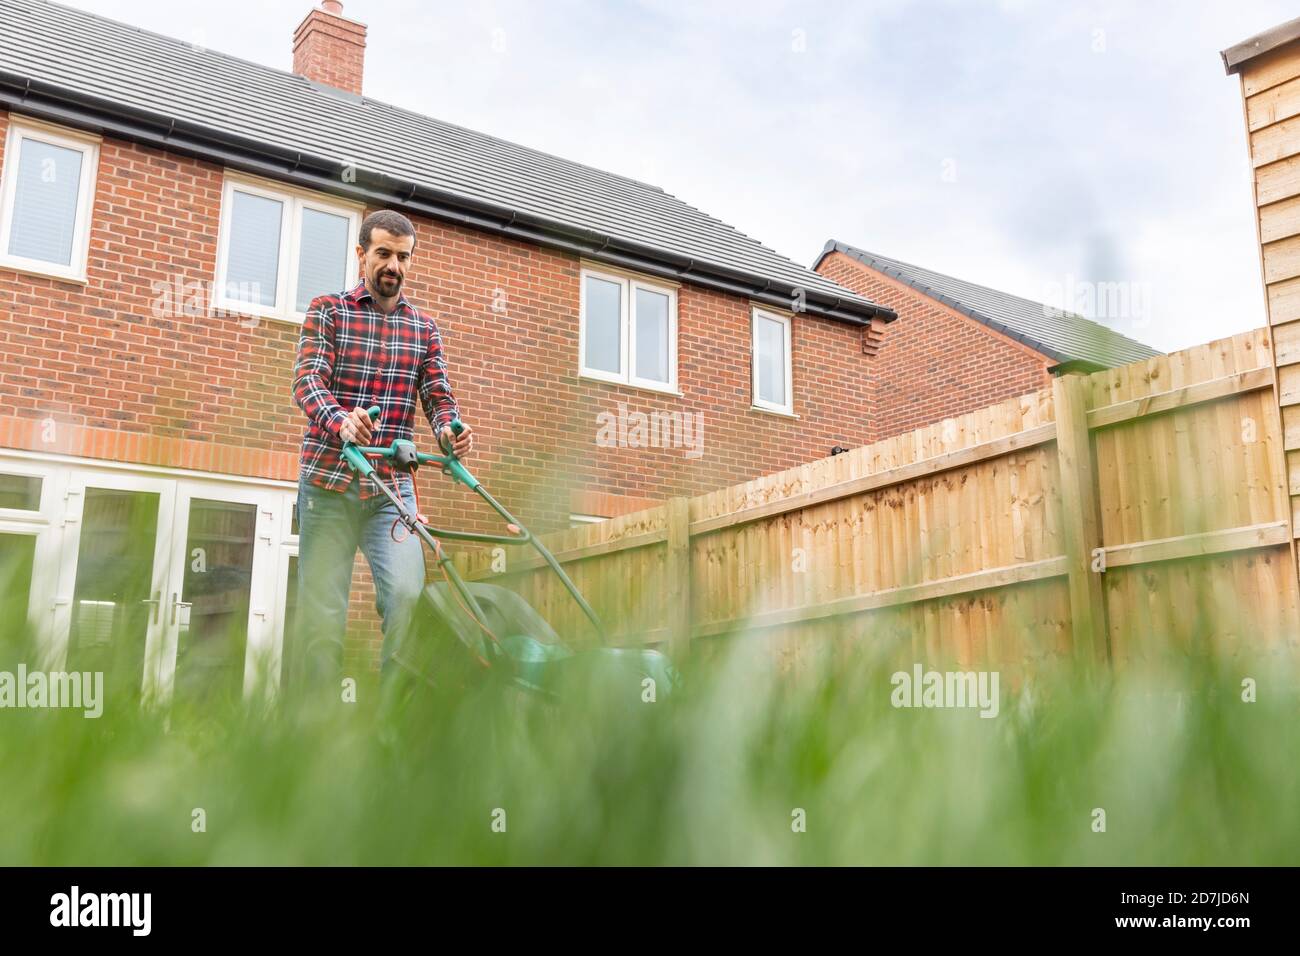 Man mowing lawn with lawn mower at backyard Stock Photo